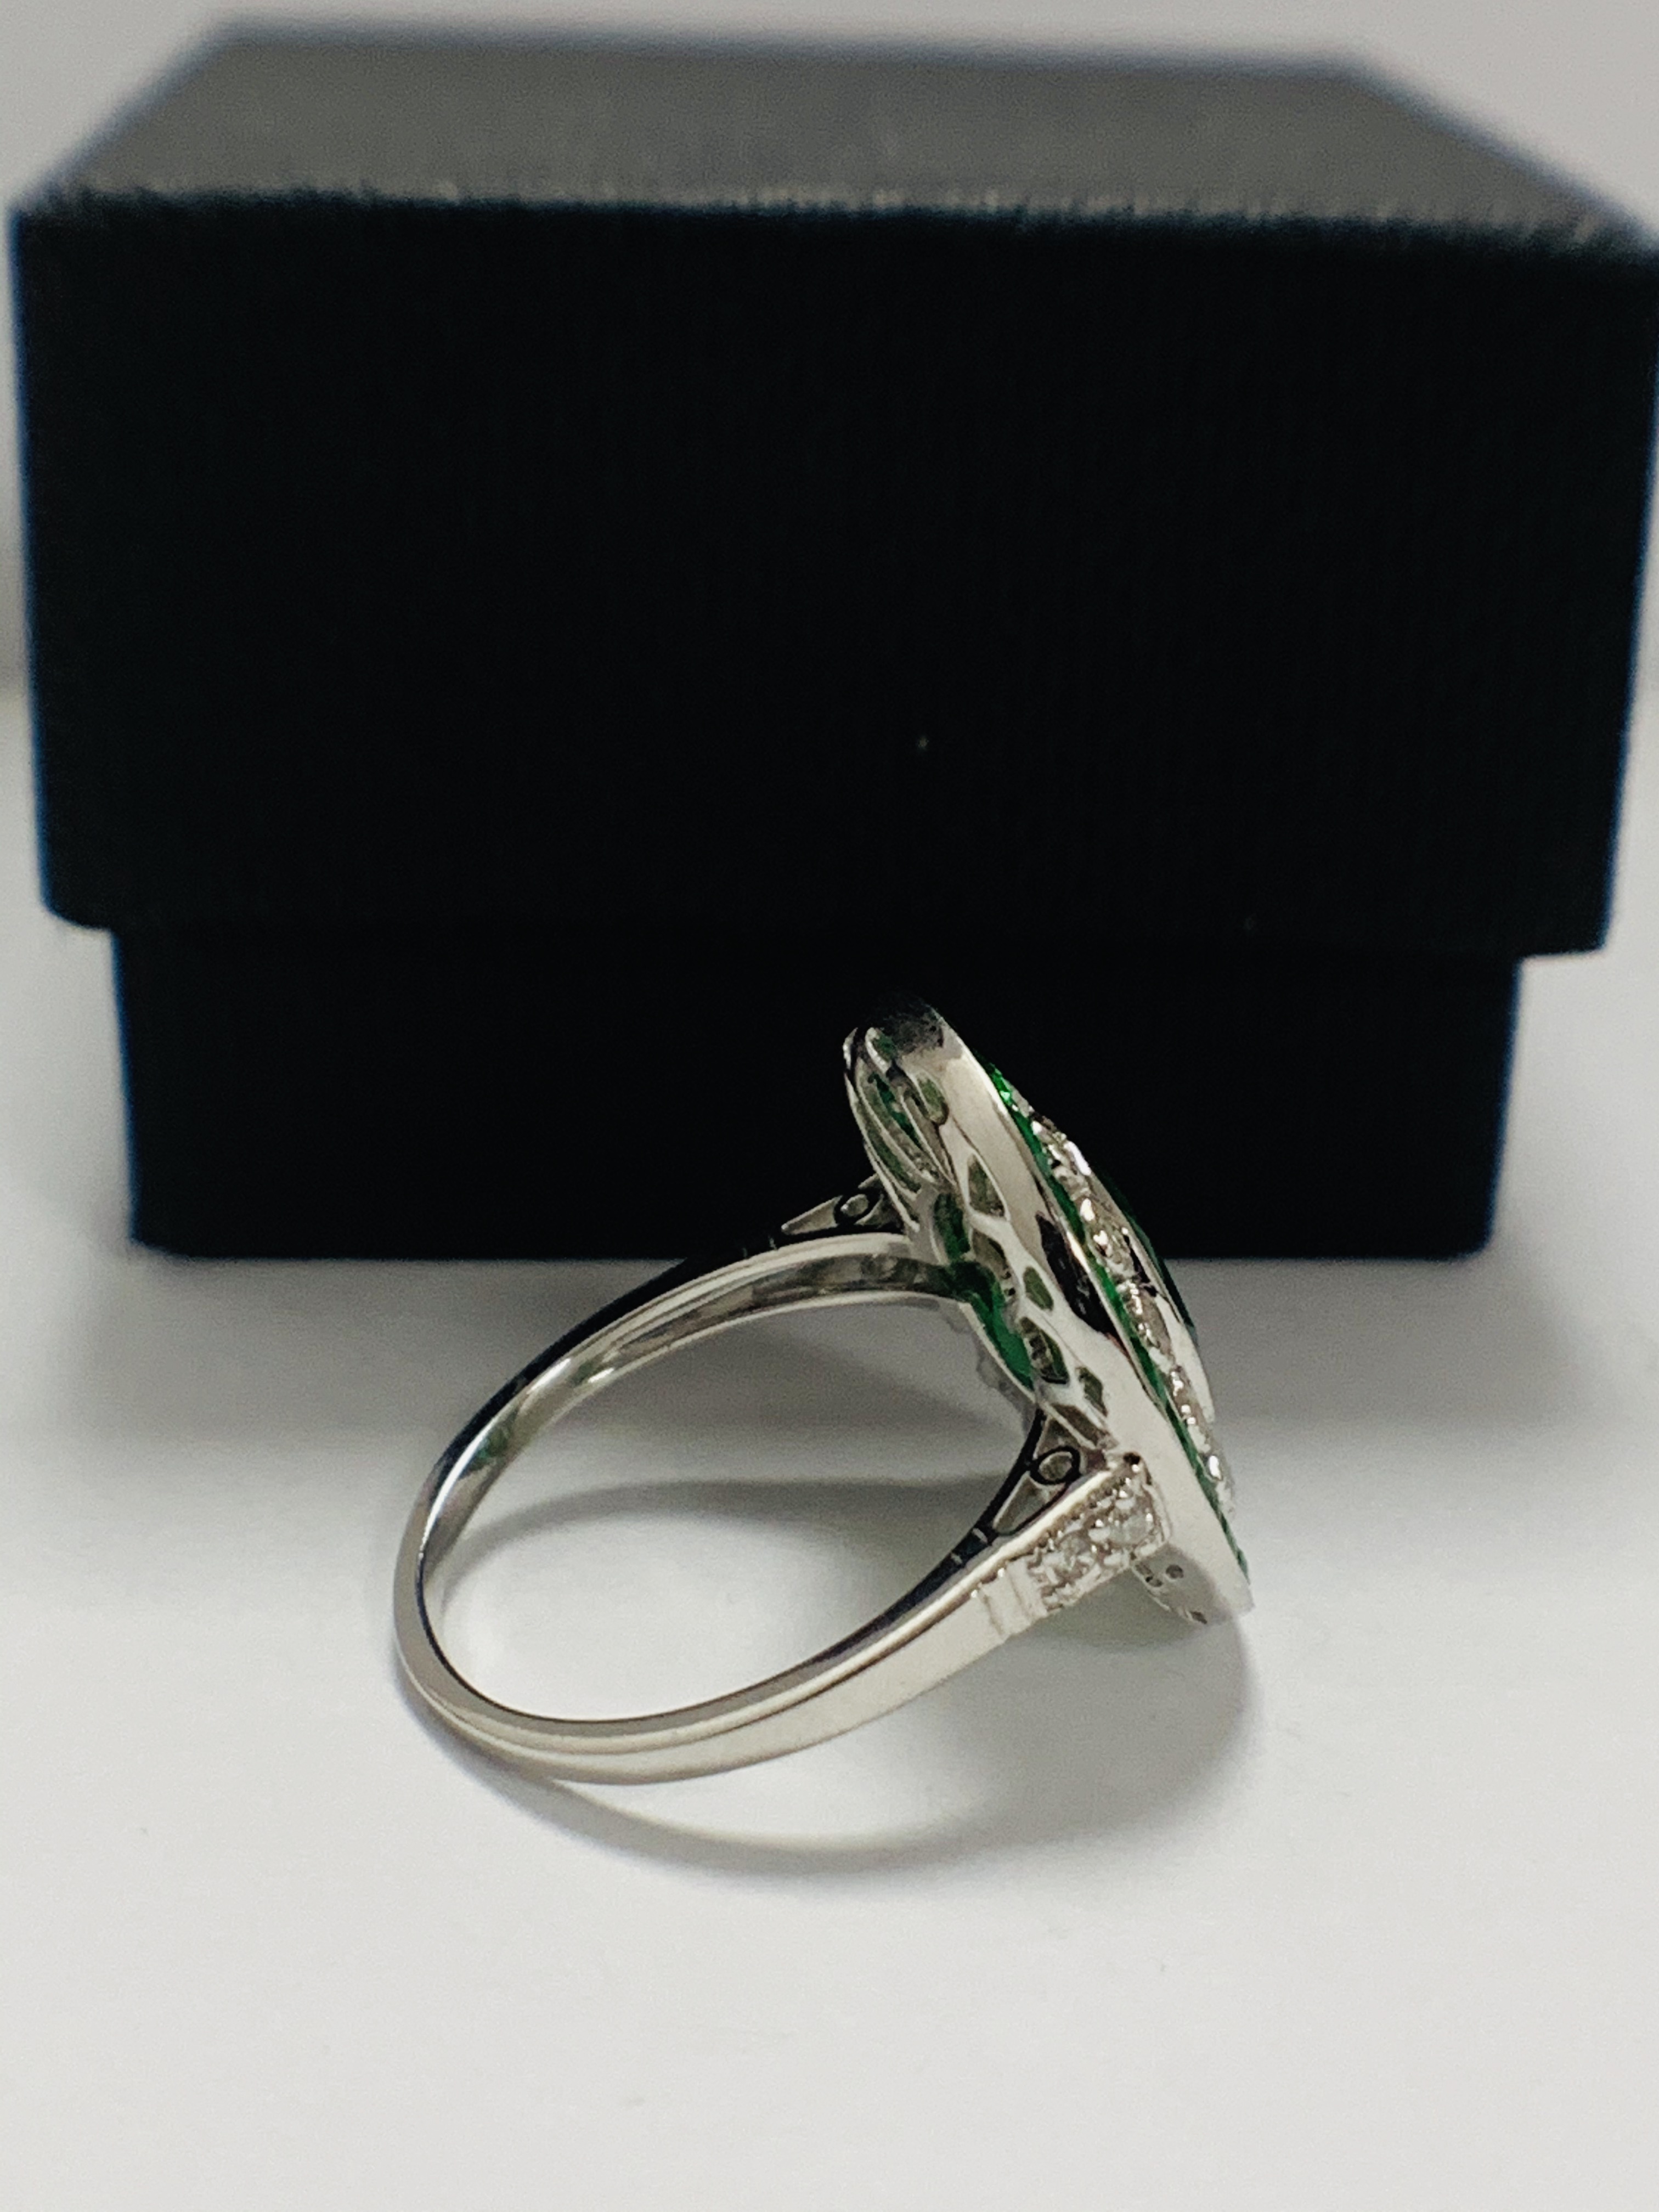 18ct White Gold Emerald and Diamond ring featuring centre, oval cut, green Emerald (2.06ct), claw se - Image 7 of 11